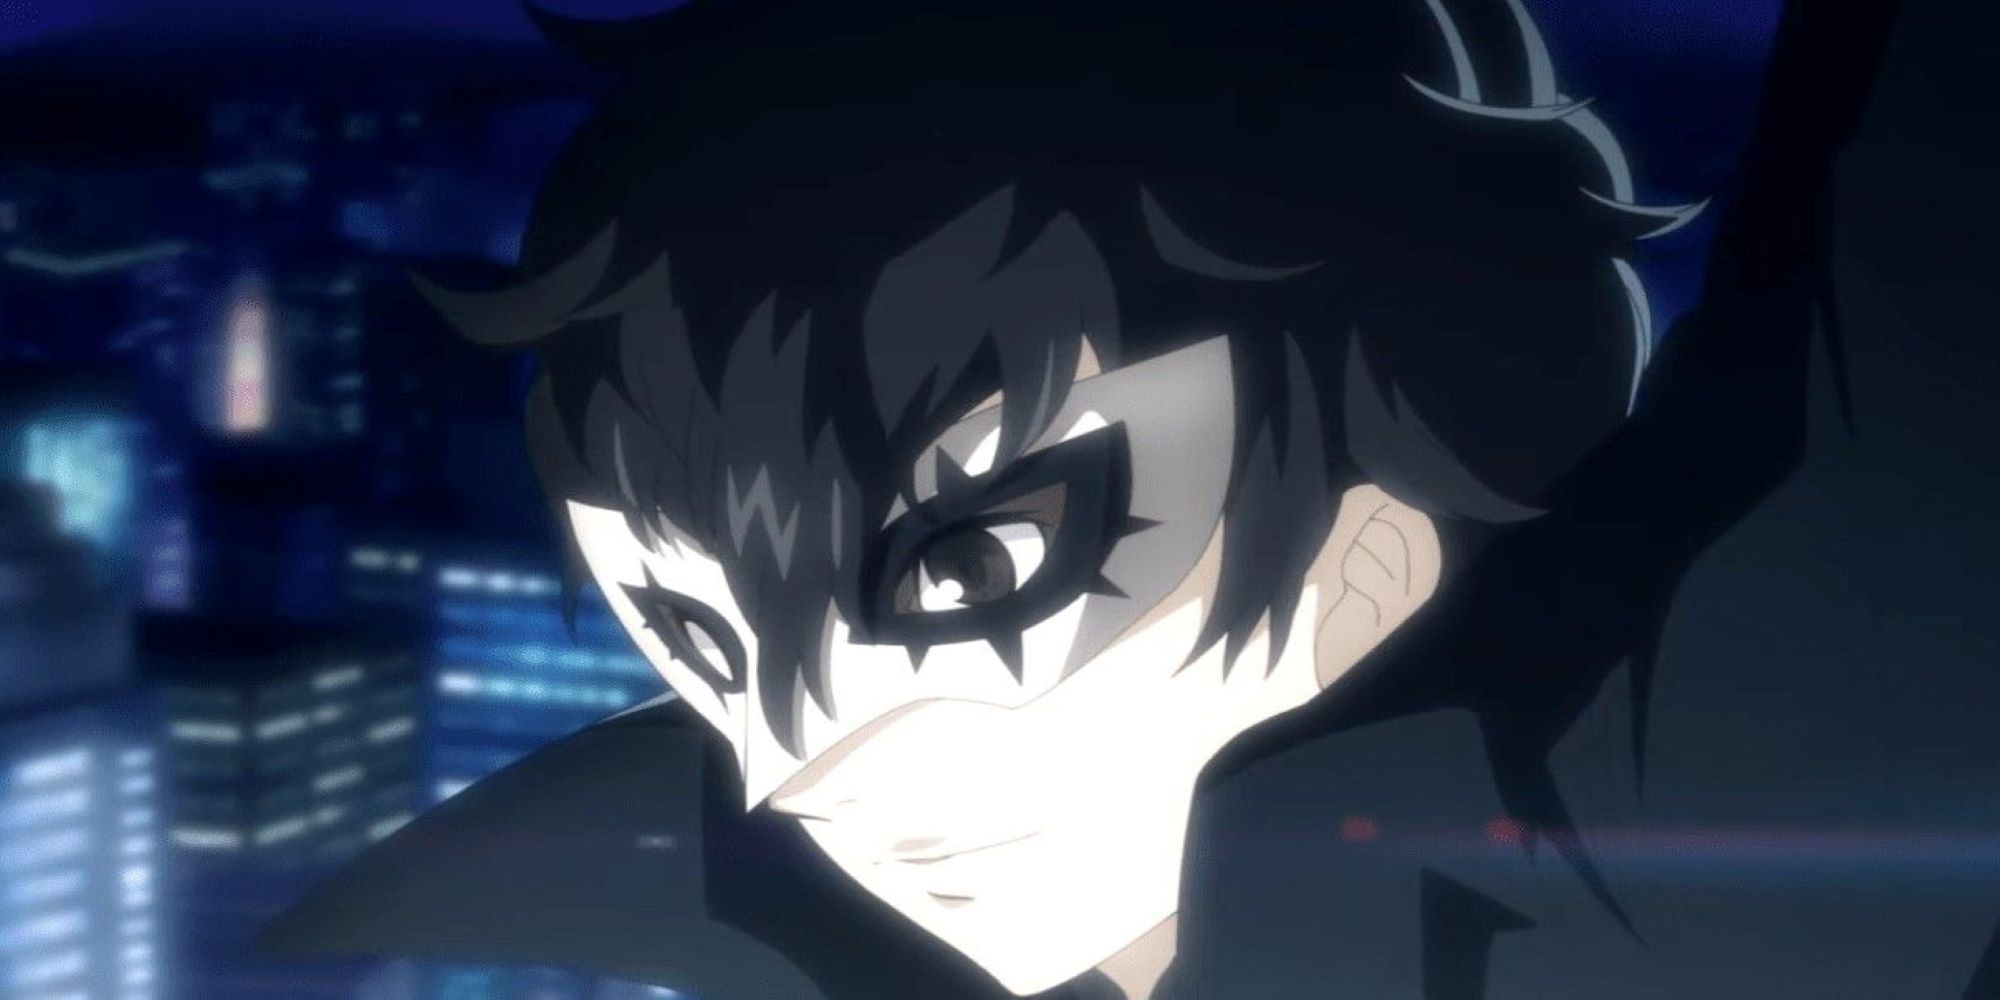 A close-up of Joker from Persona 5 Royal against a cityscape backdrop.